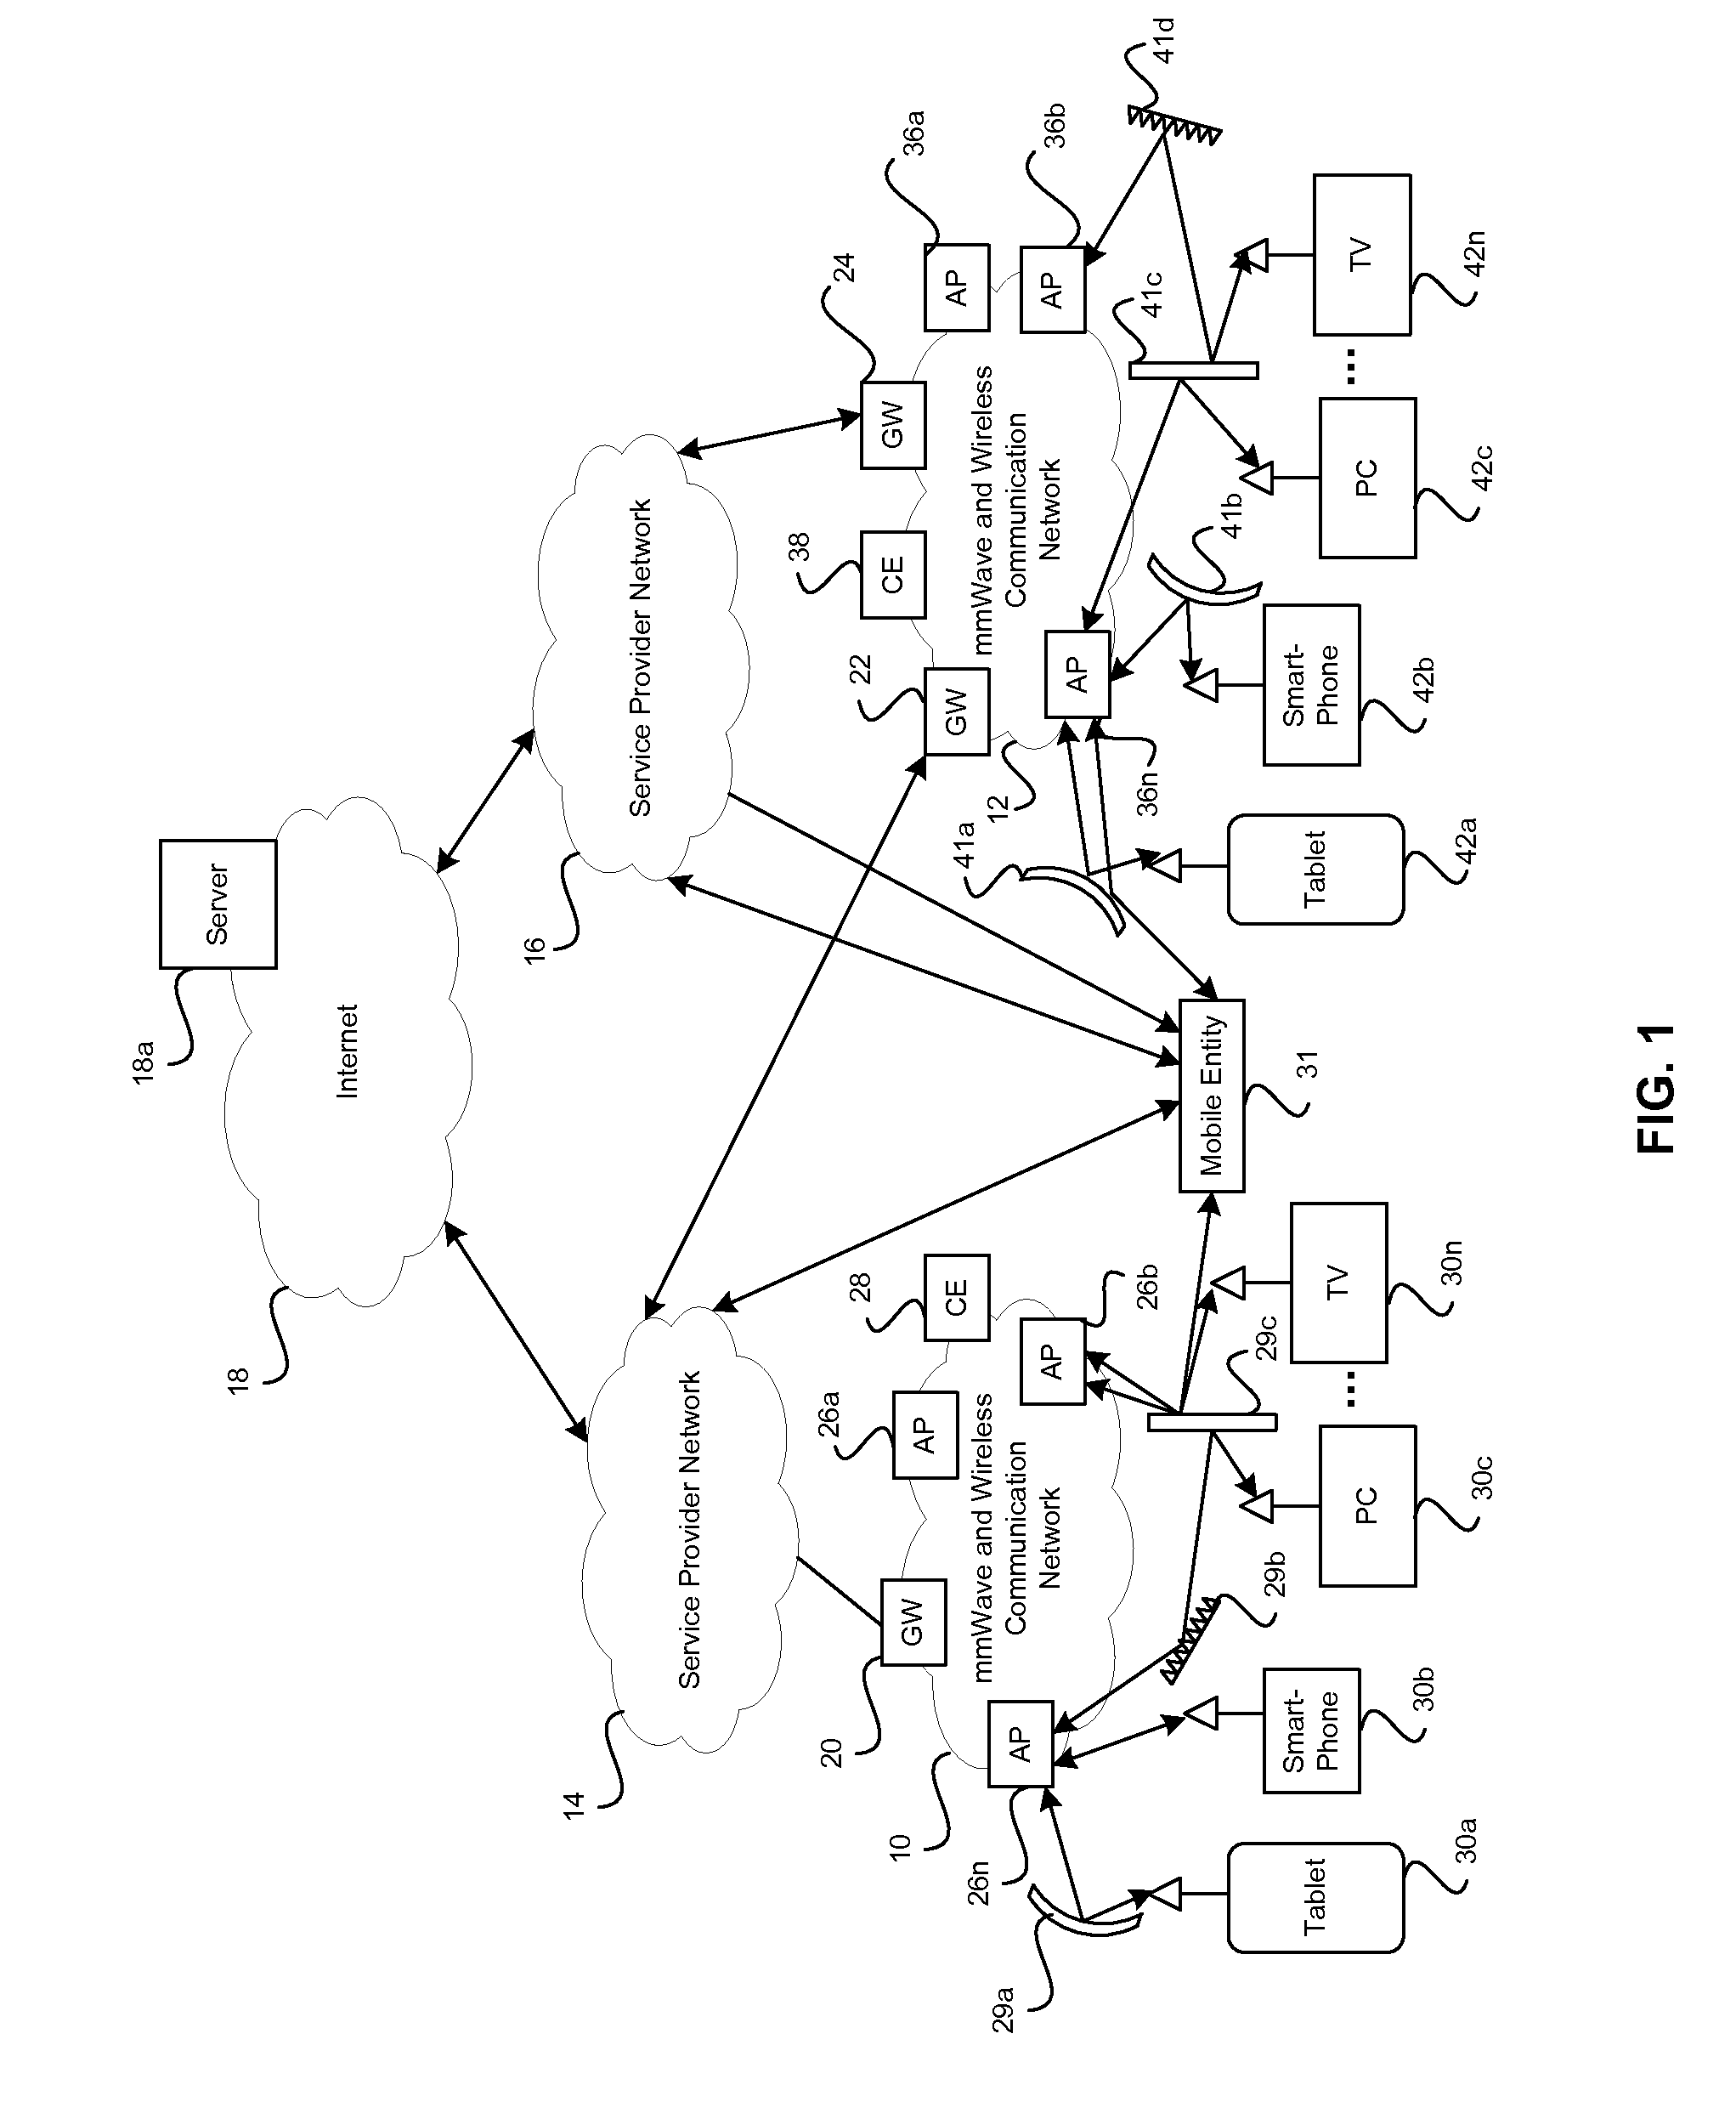 Method and system for a distributed configurable transceiver architecture and implementation